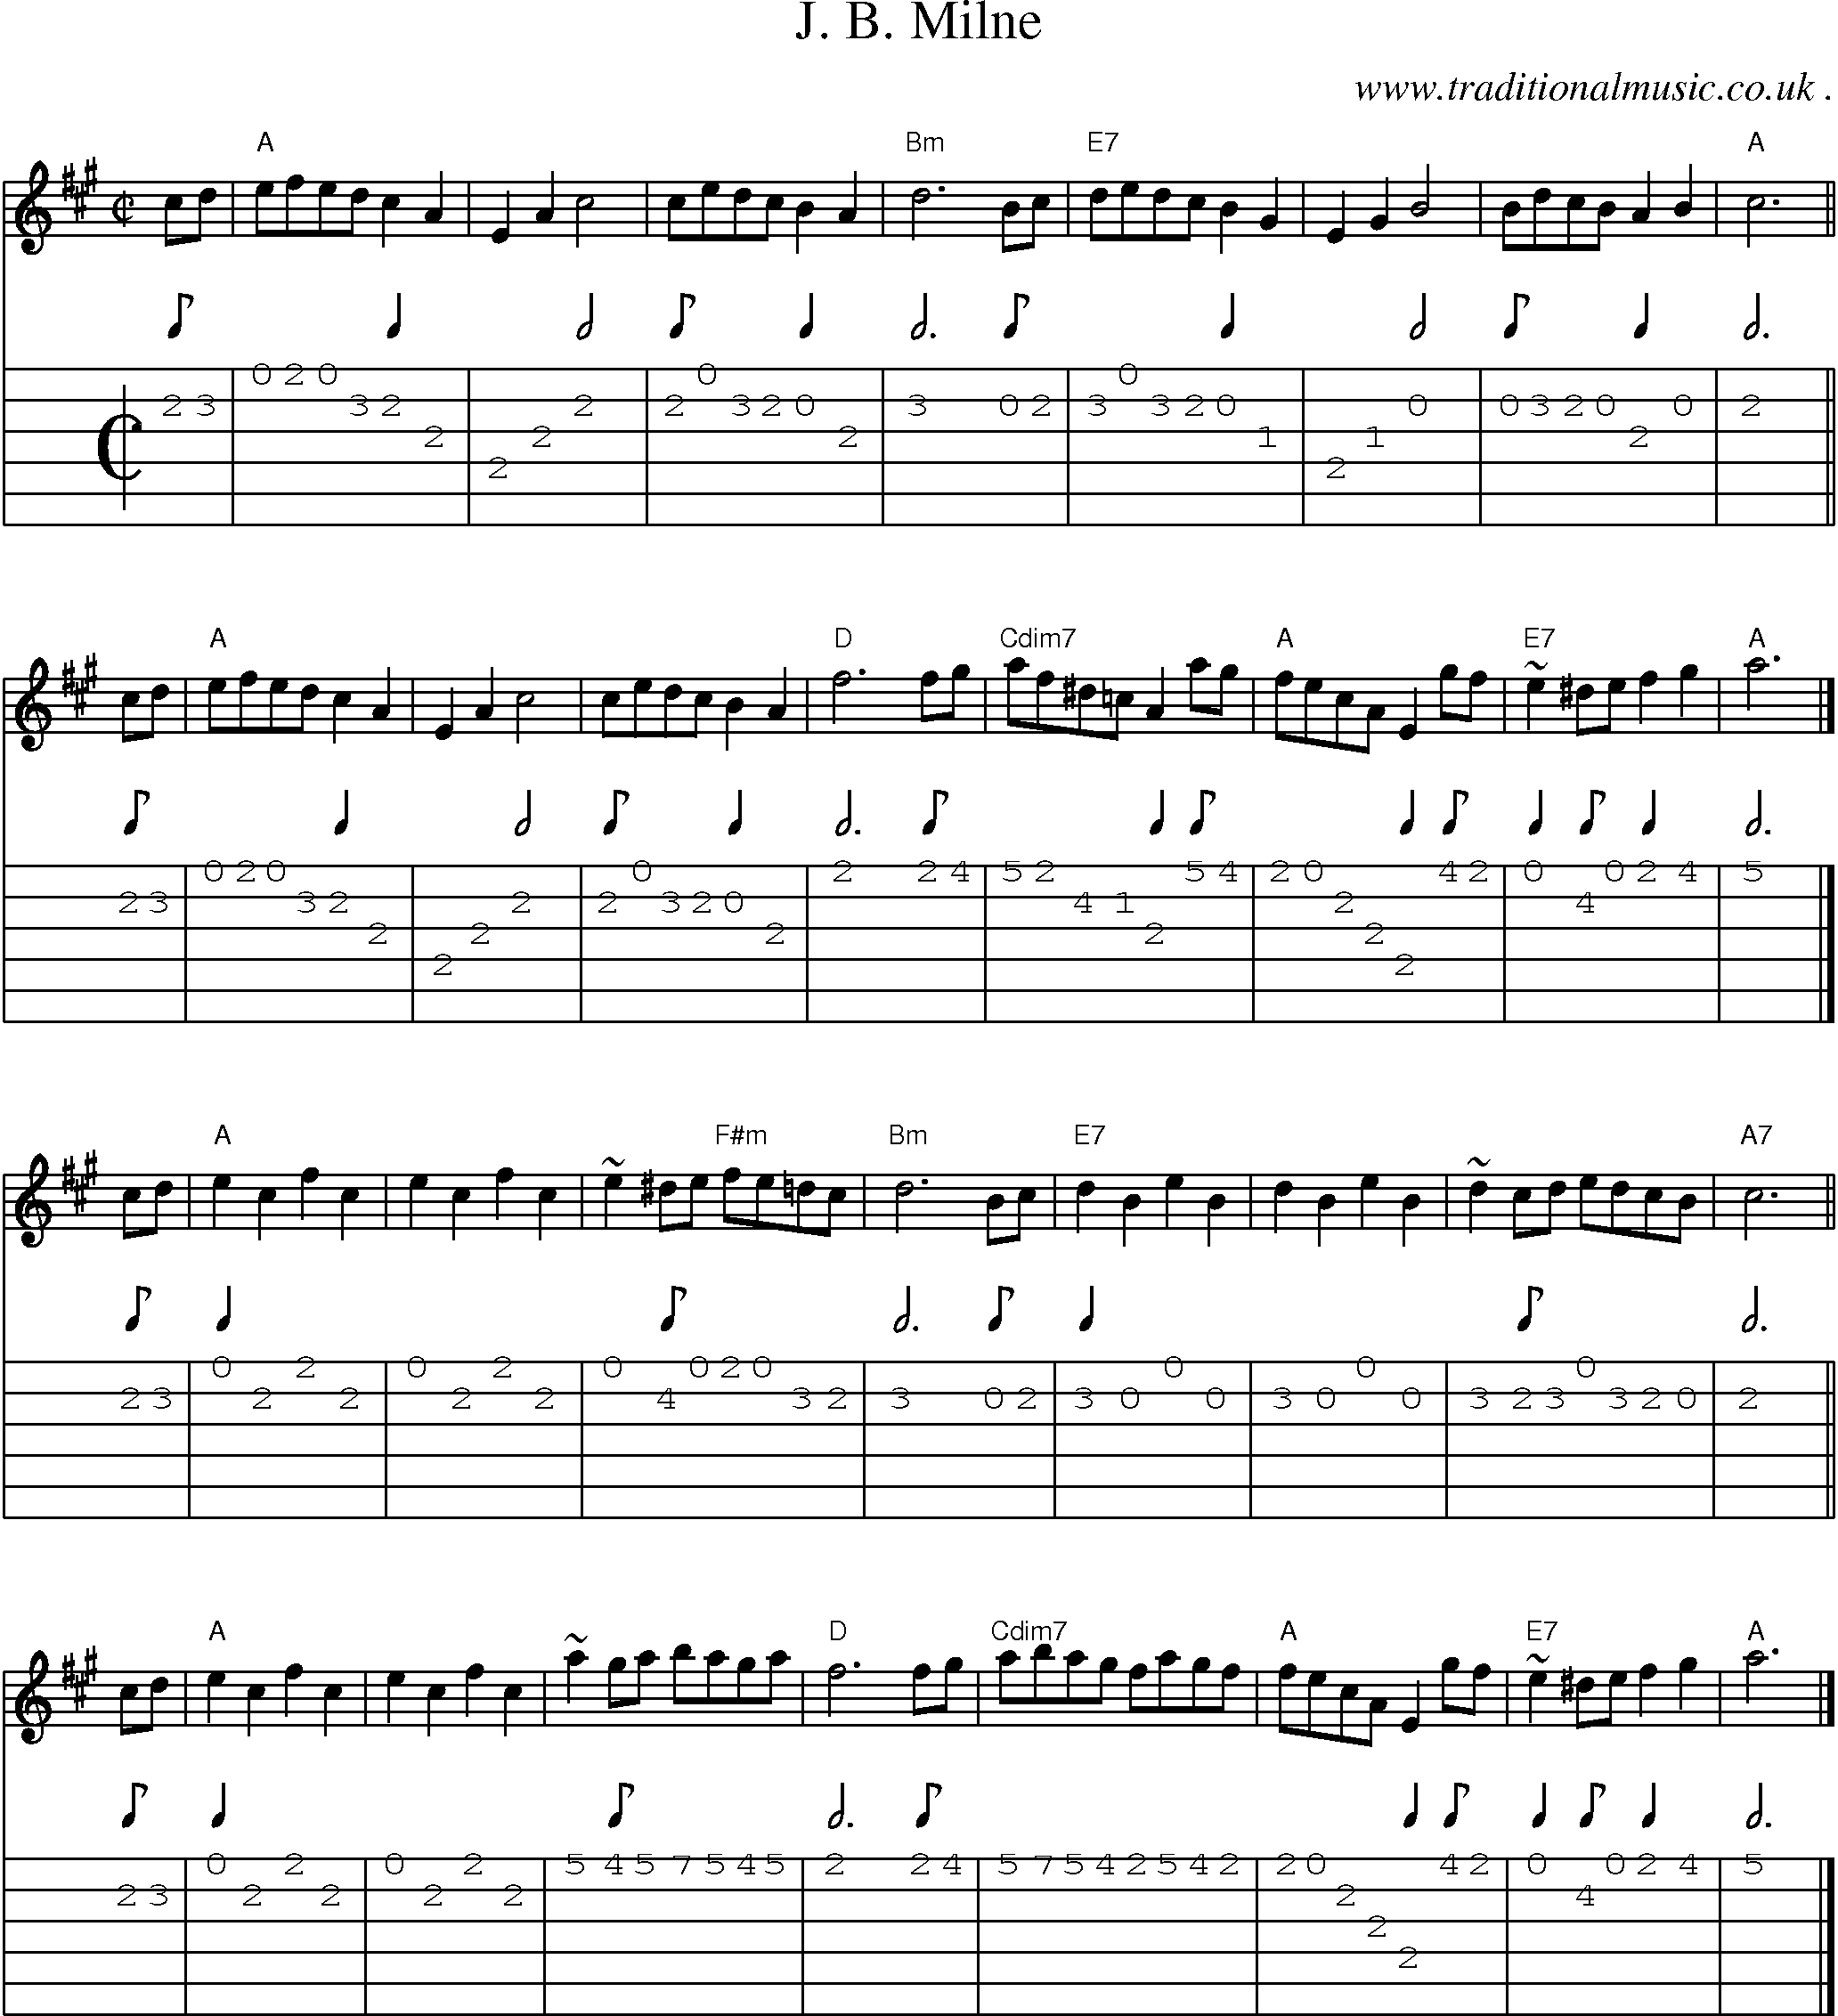 Sheet-music  score, Chords and Guitar Tabs for J B Milne